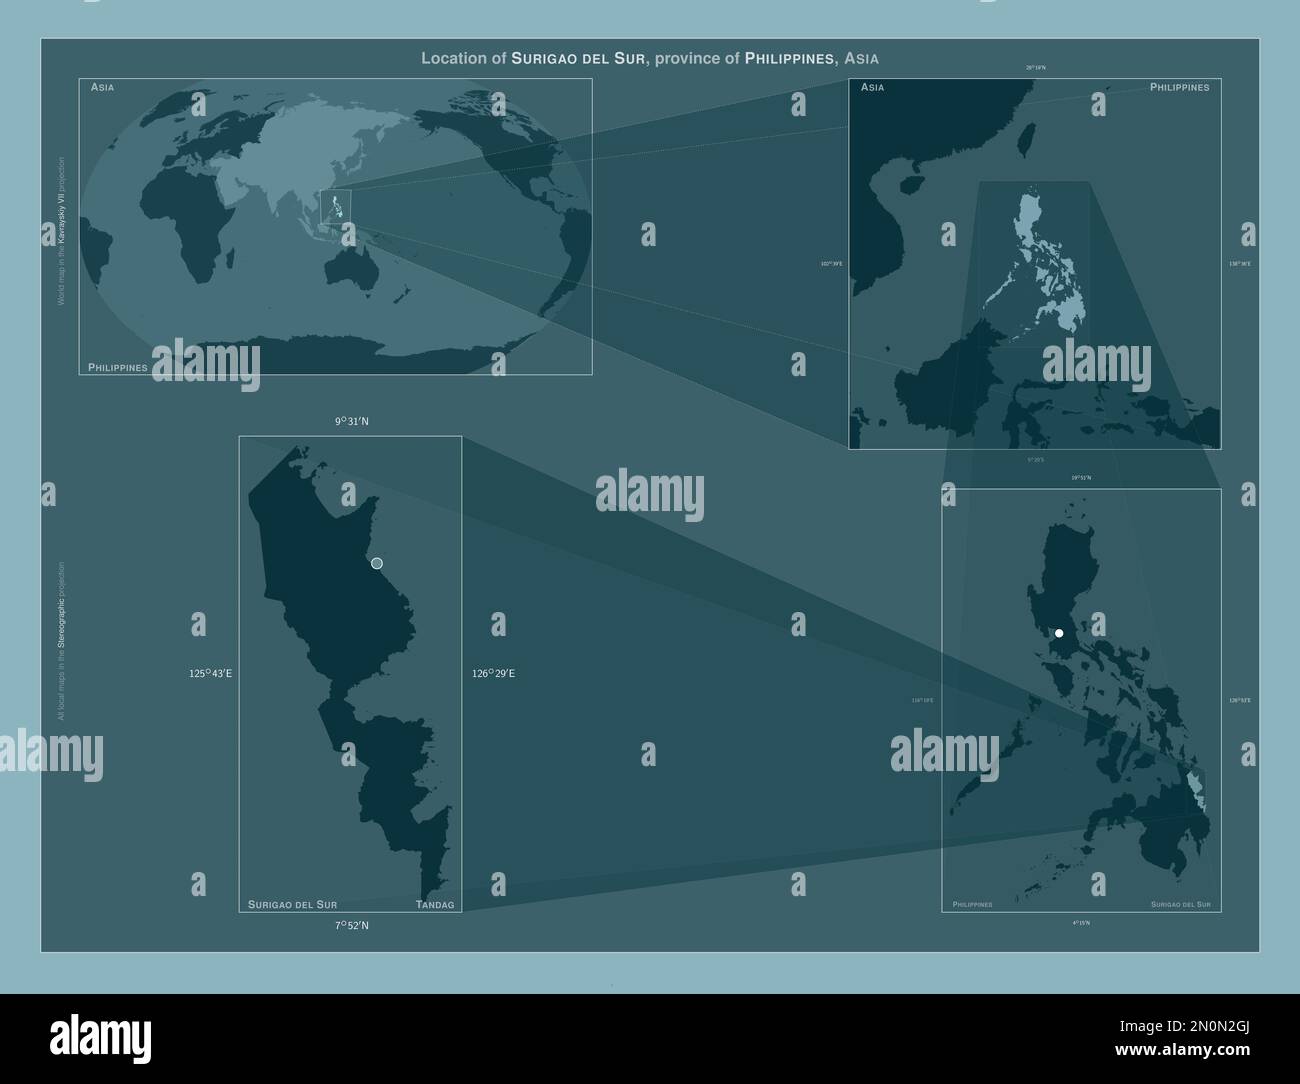 Surigao del Sur, province of Philippines. Diagram showing the location of the region on larger-scale maps. Composition of vector frames and PNG shapes Stock Photo